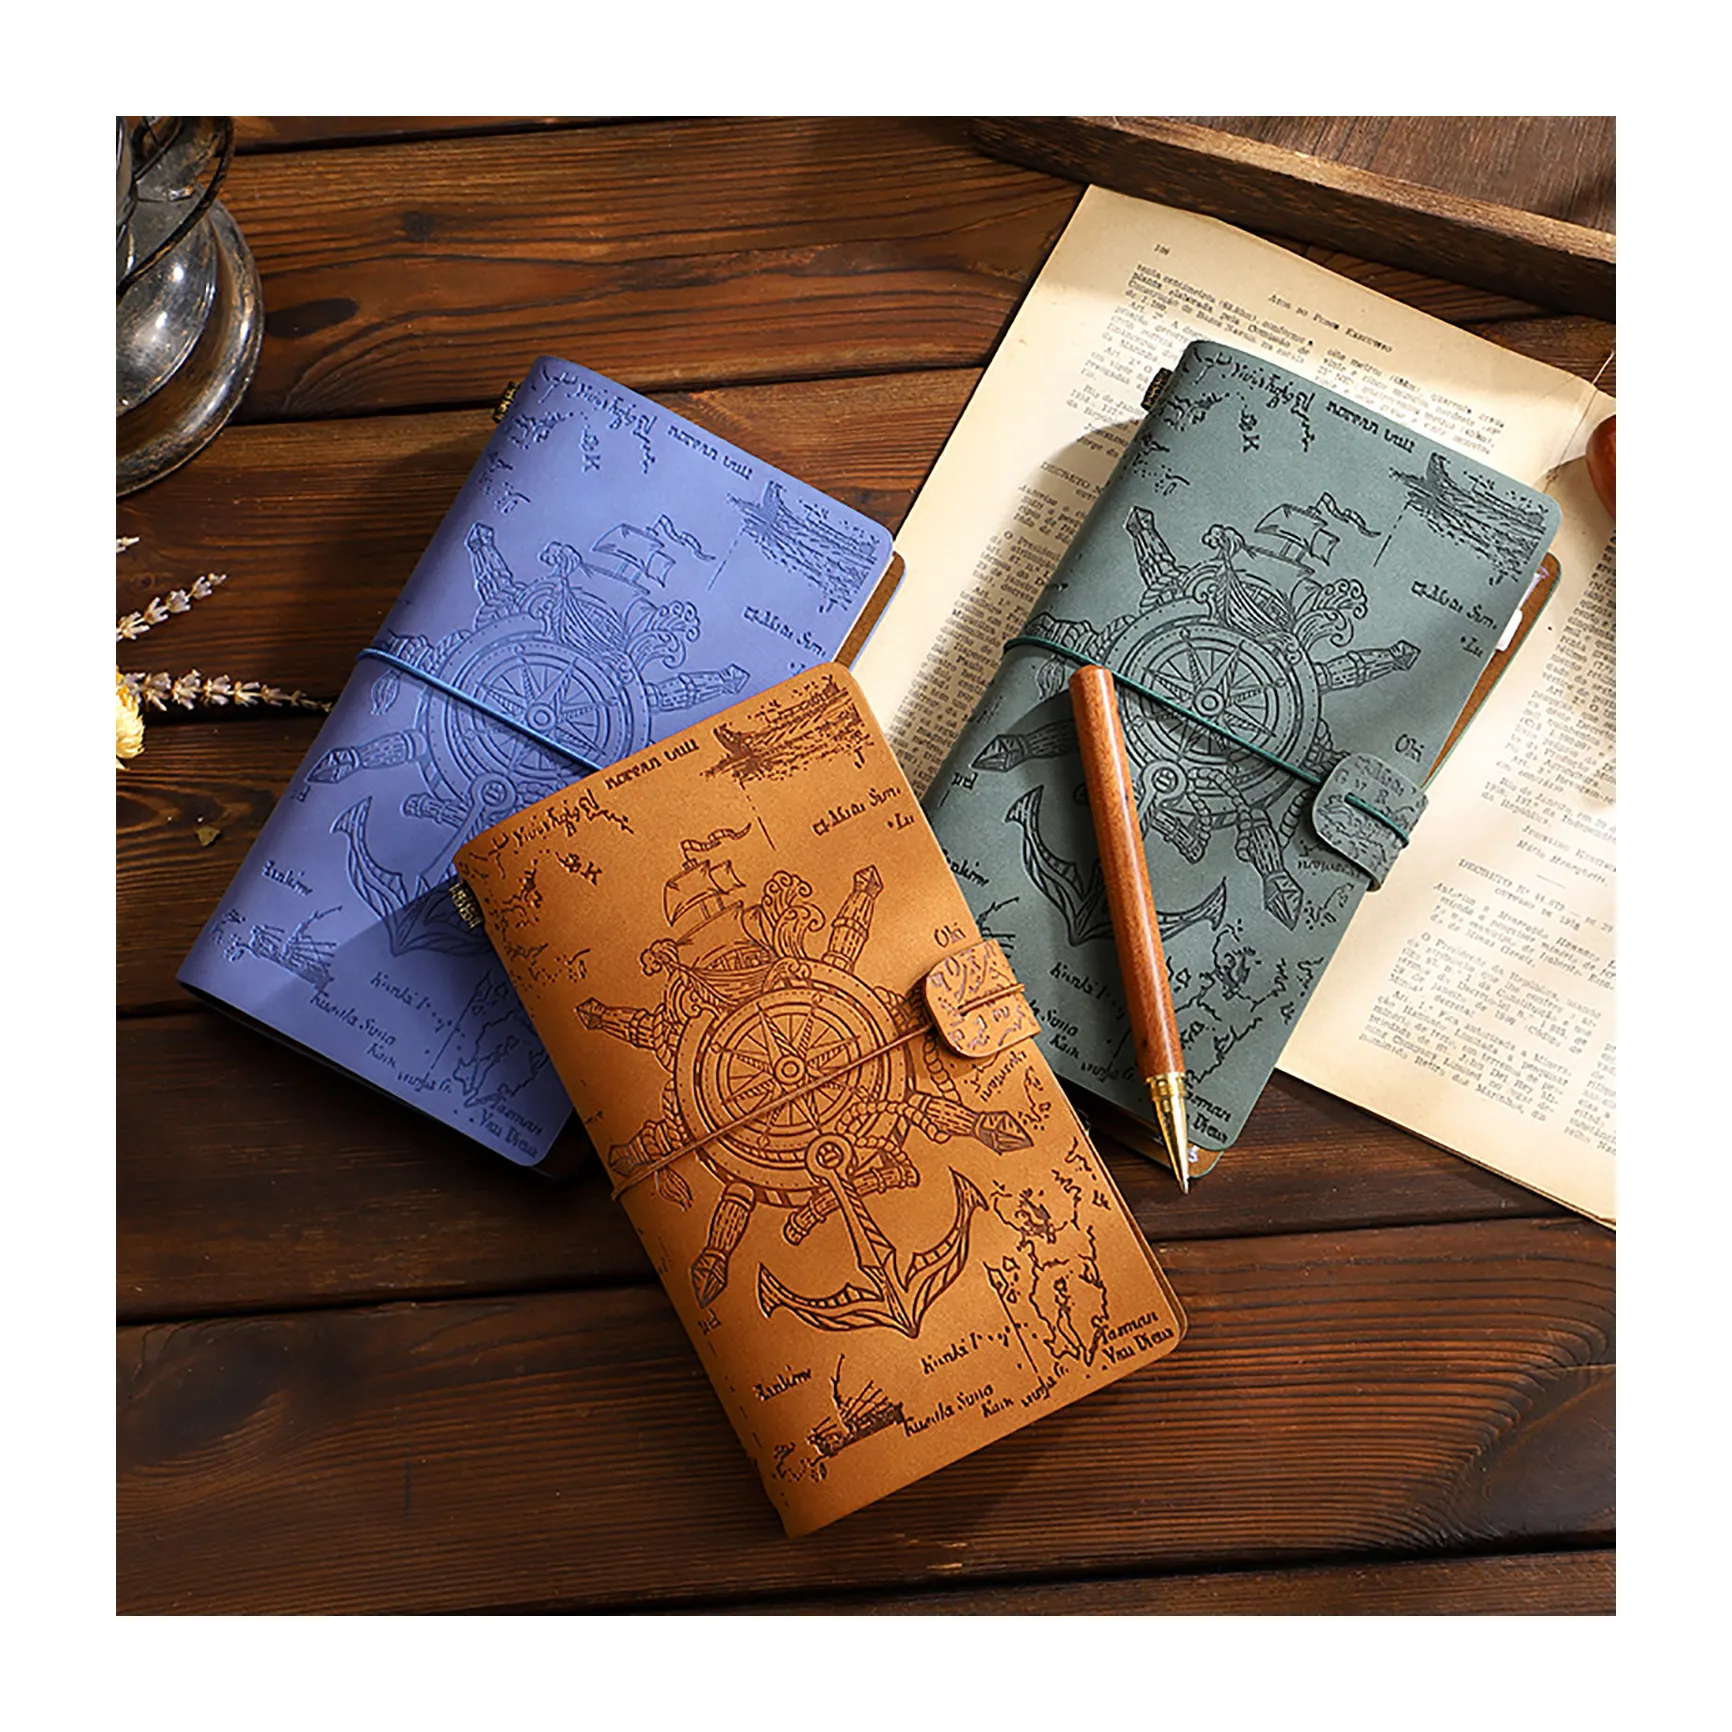 A6 Refillable Notebook Vintage Elegance Pvc Bag Insied Soft Pu Leather Cover Light Luxury To Simplicitytraveler Diary